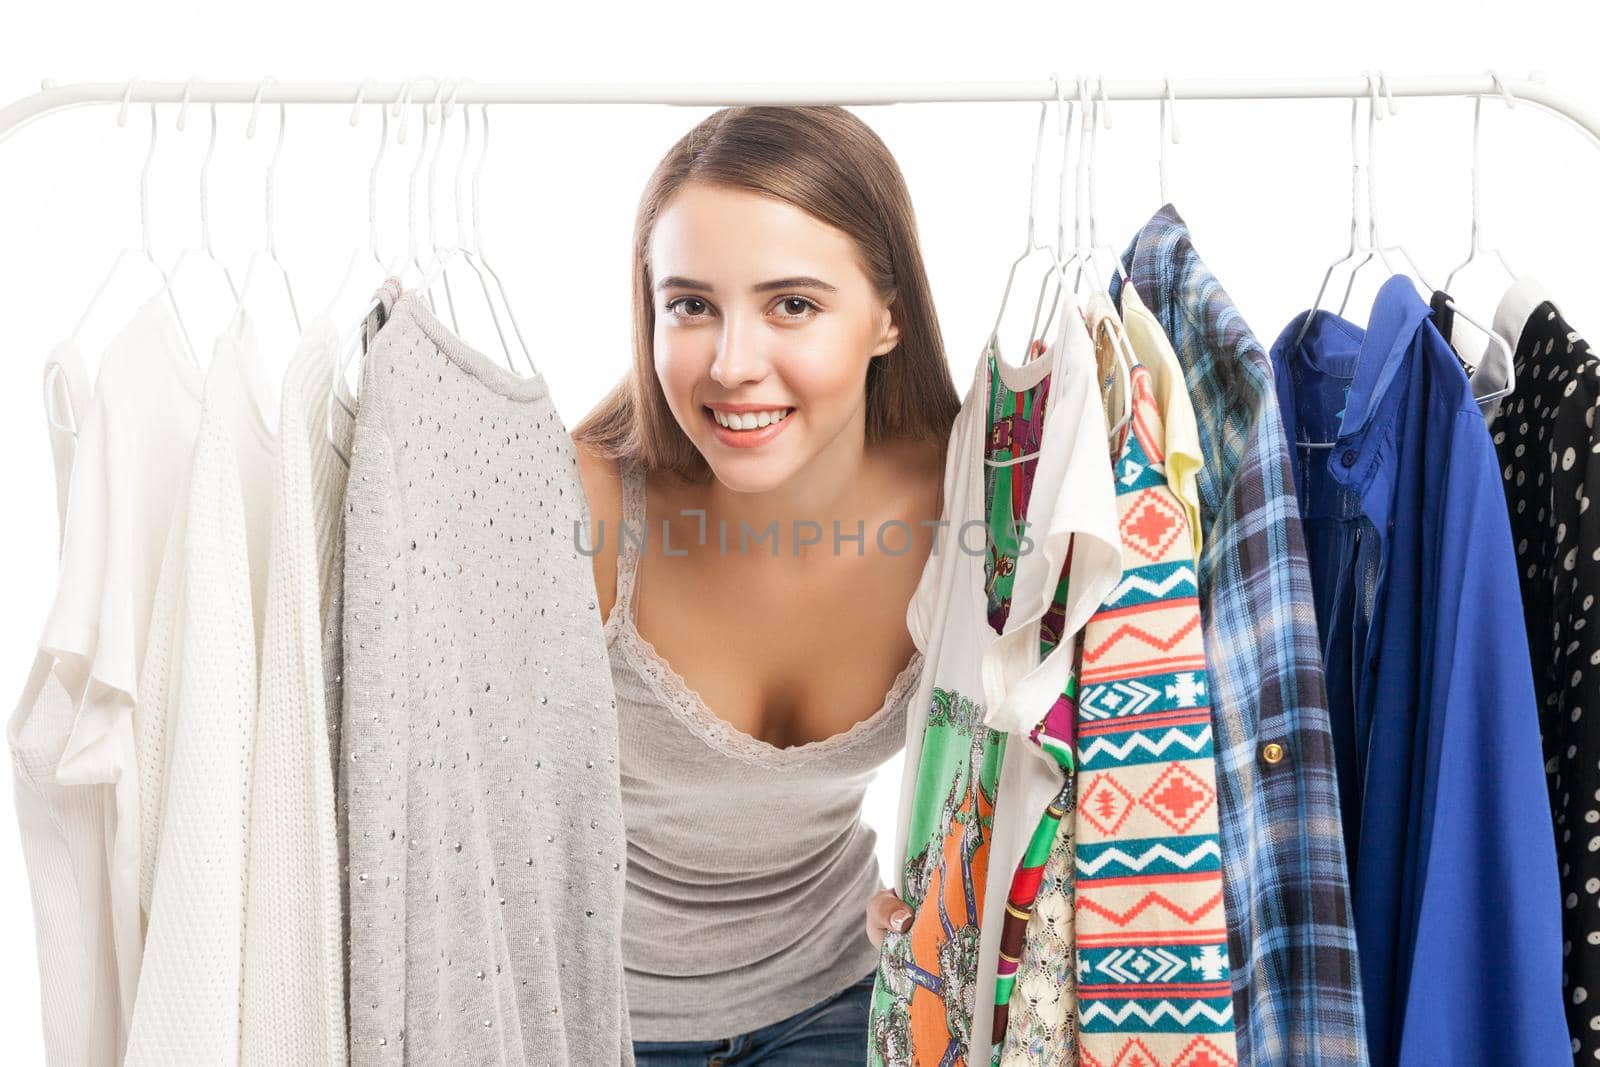 Young beautiful woman smiling at camera while standing between clothes on hanger